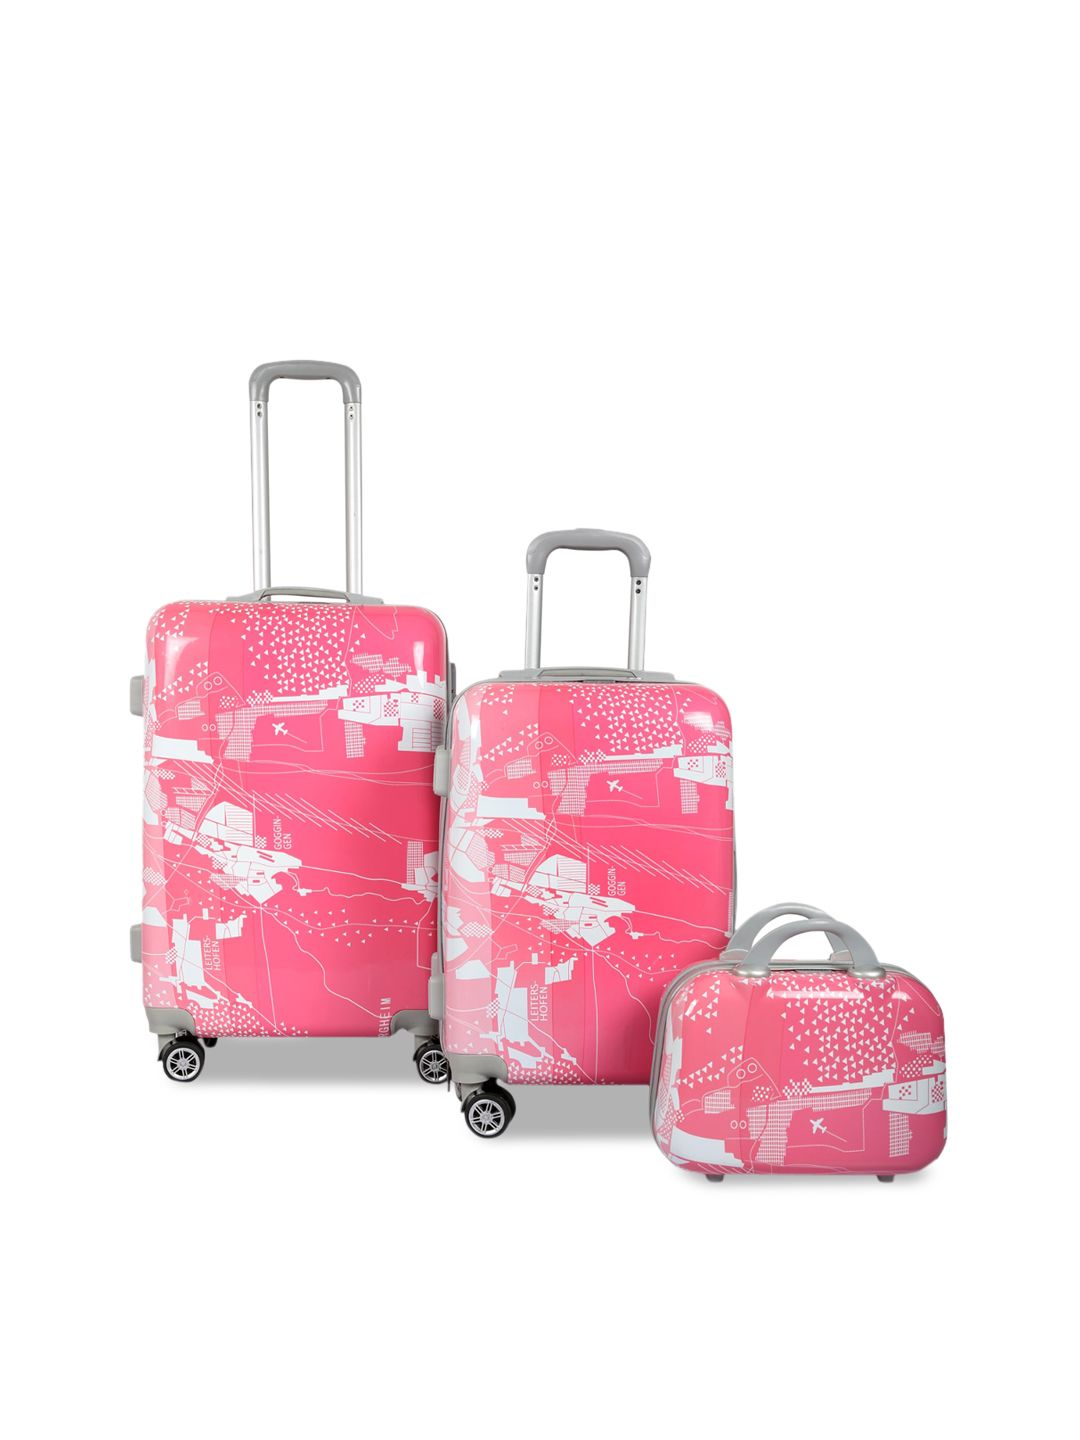 Polo Class Pink 2 Pc Set Trolley Bag with 1Pc Vanity Bag Price in India